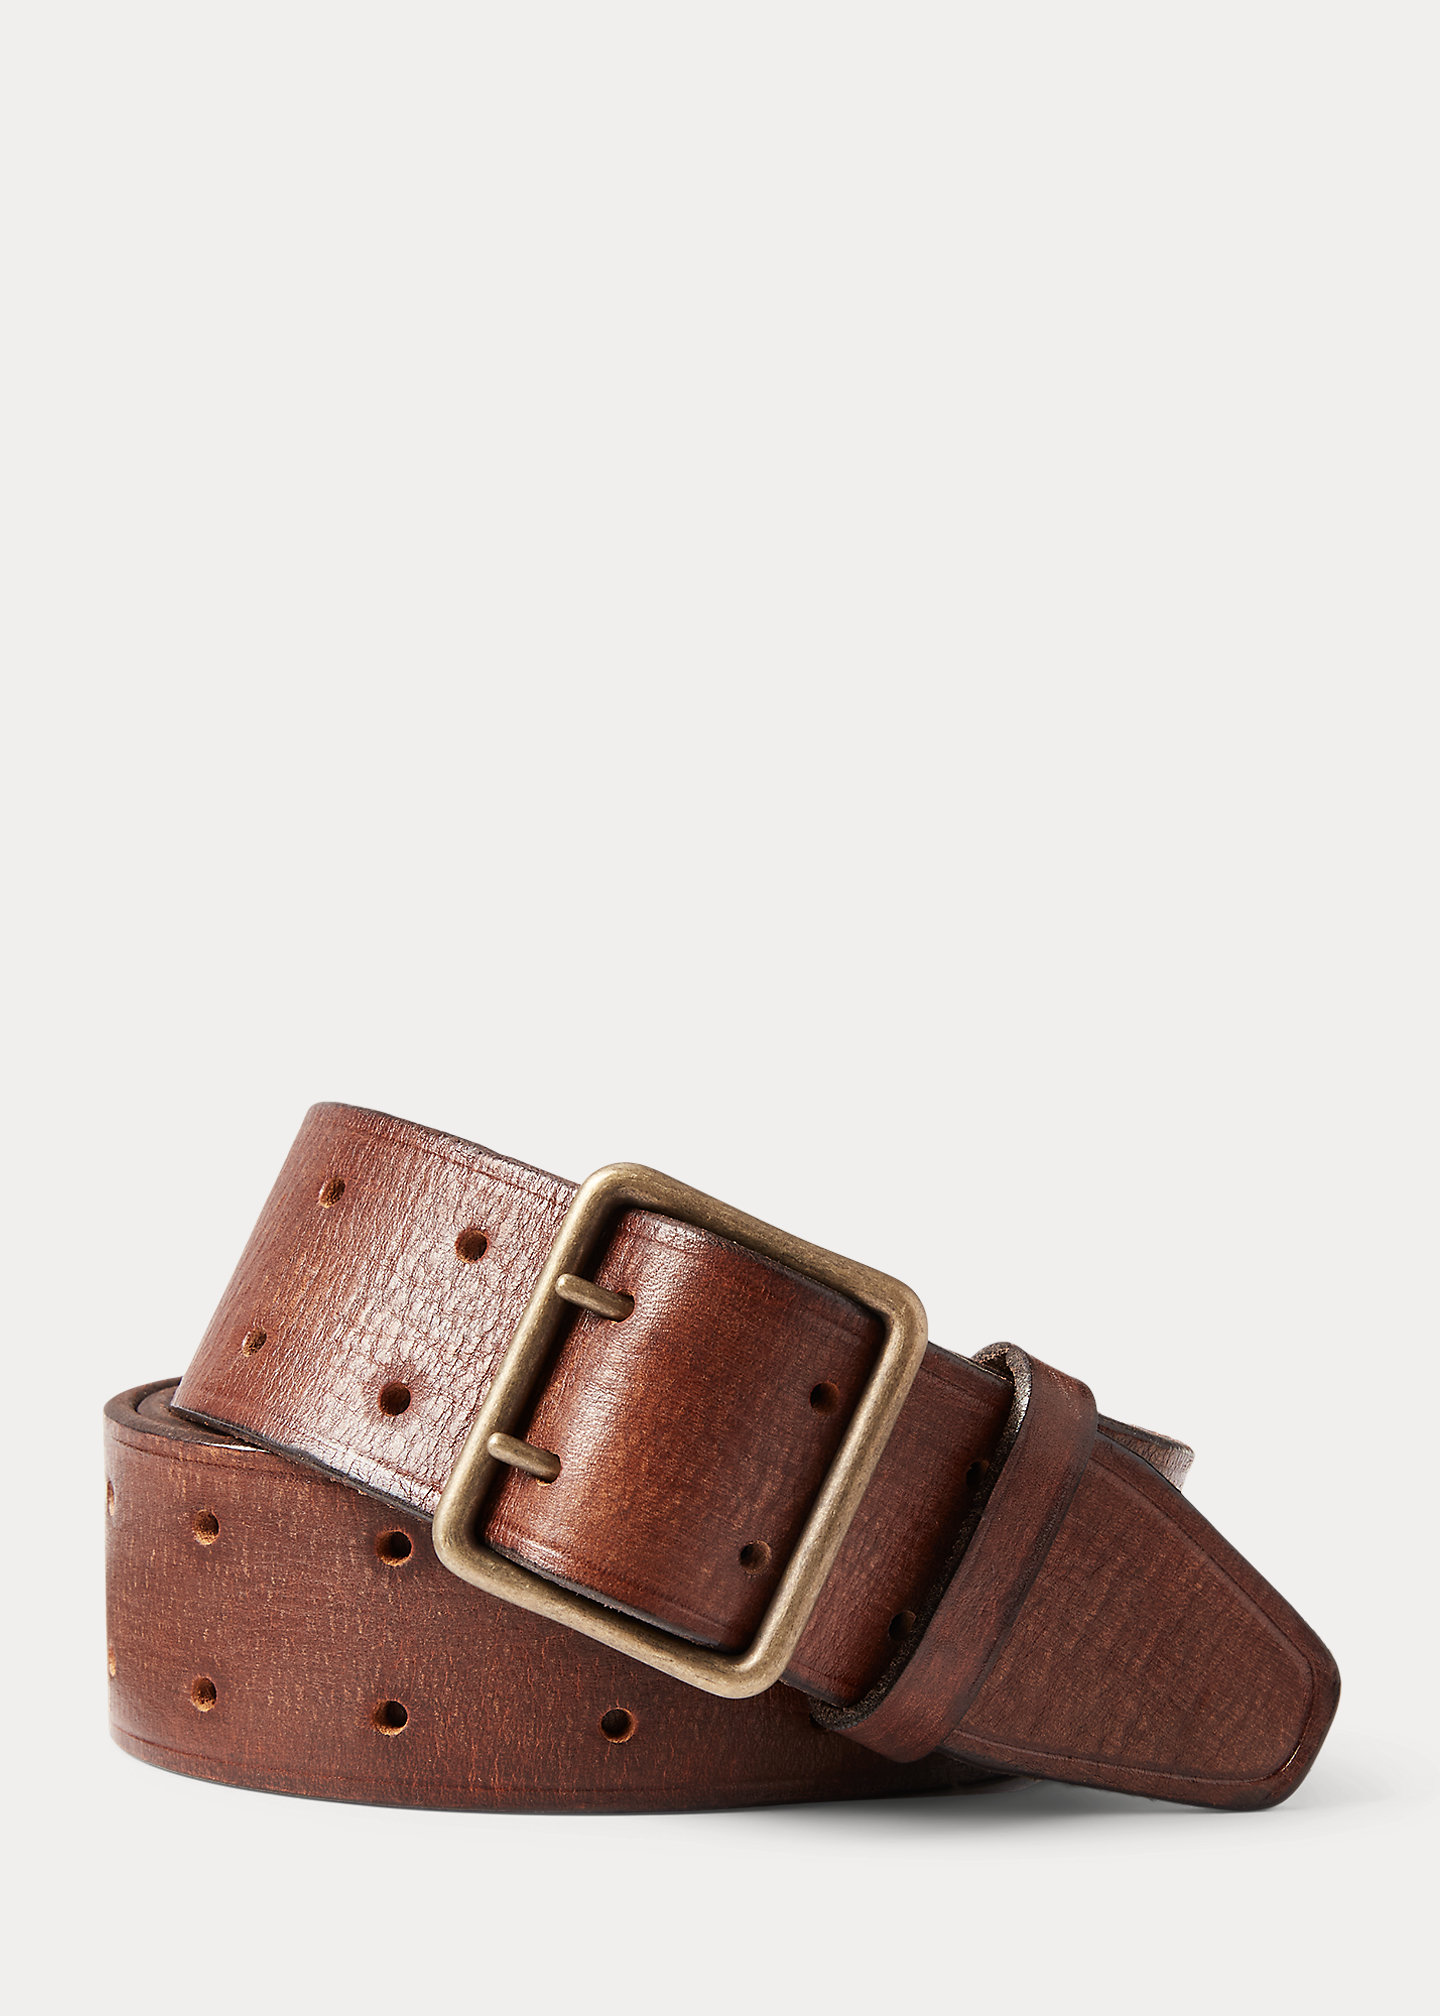 Leather Double-Prong Belt